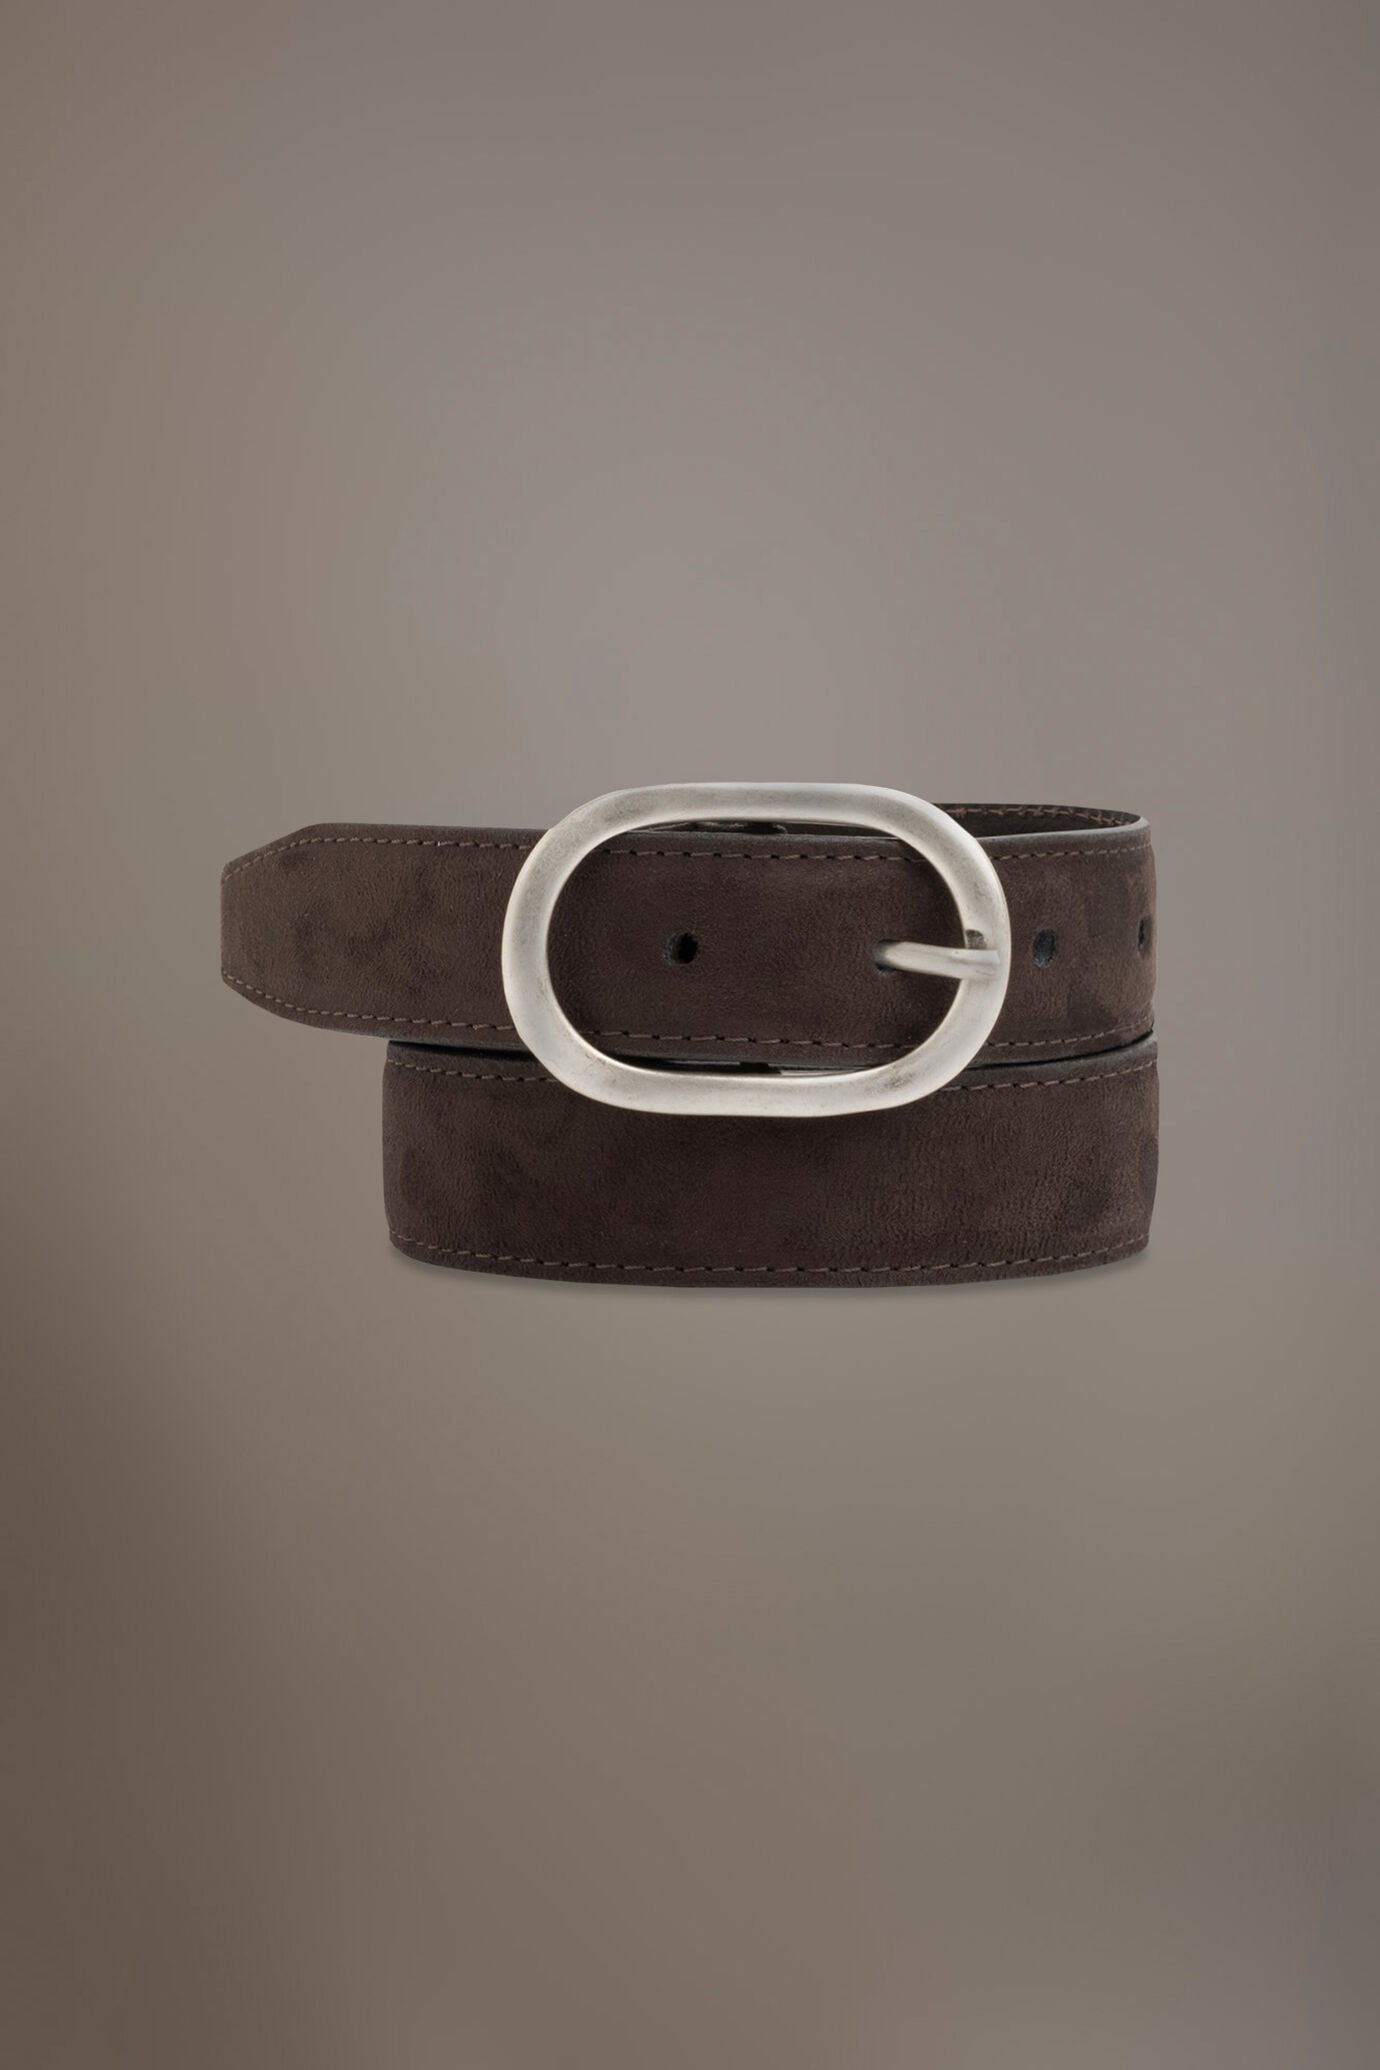 Suede belt made in italy